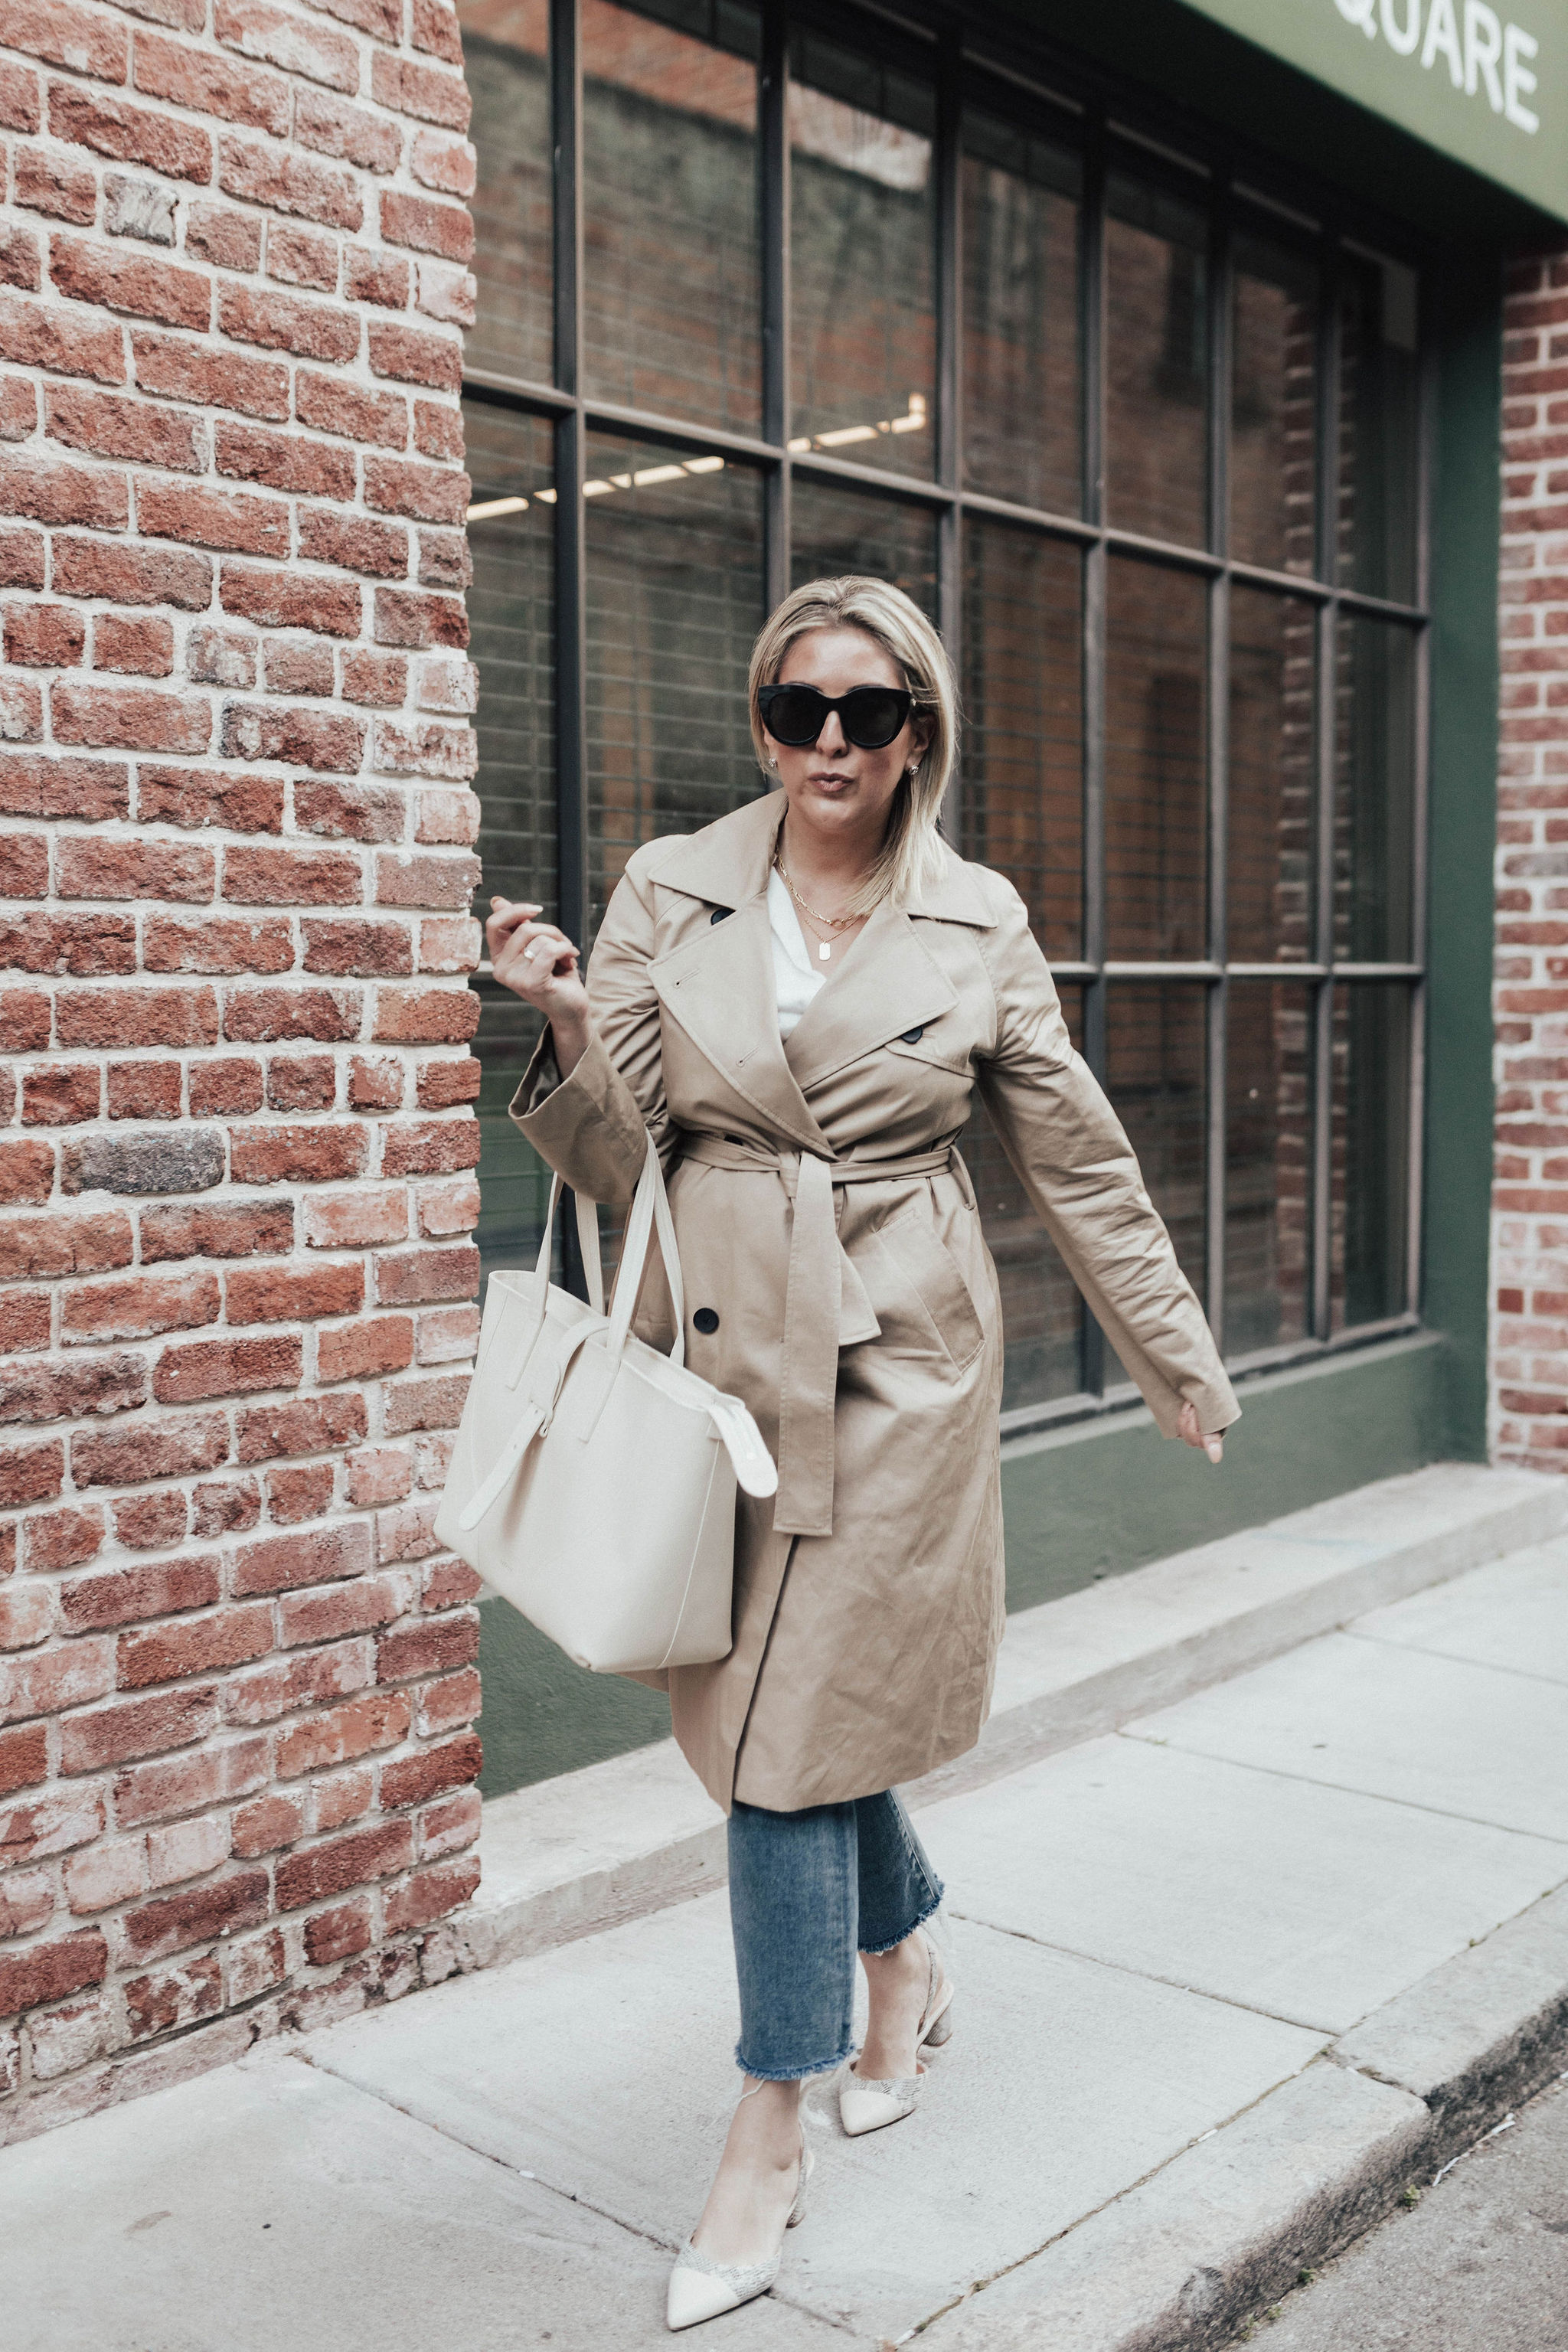 Style Inspired By Angelina Jolie, KatWalkSF wears an Everlane trench and SENREVE Voya tote